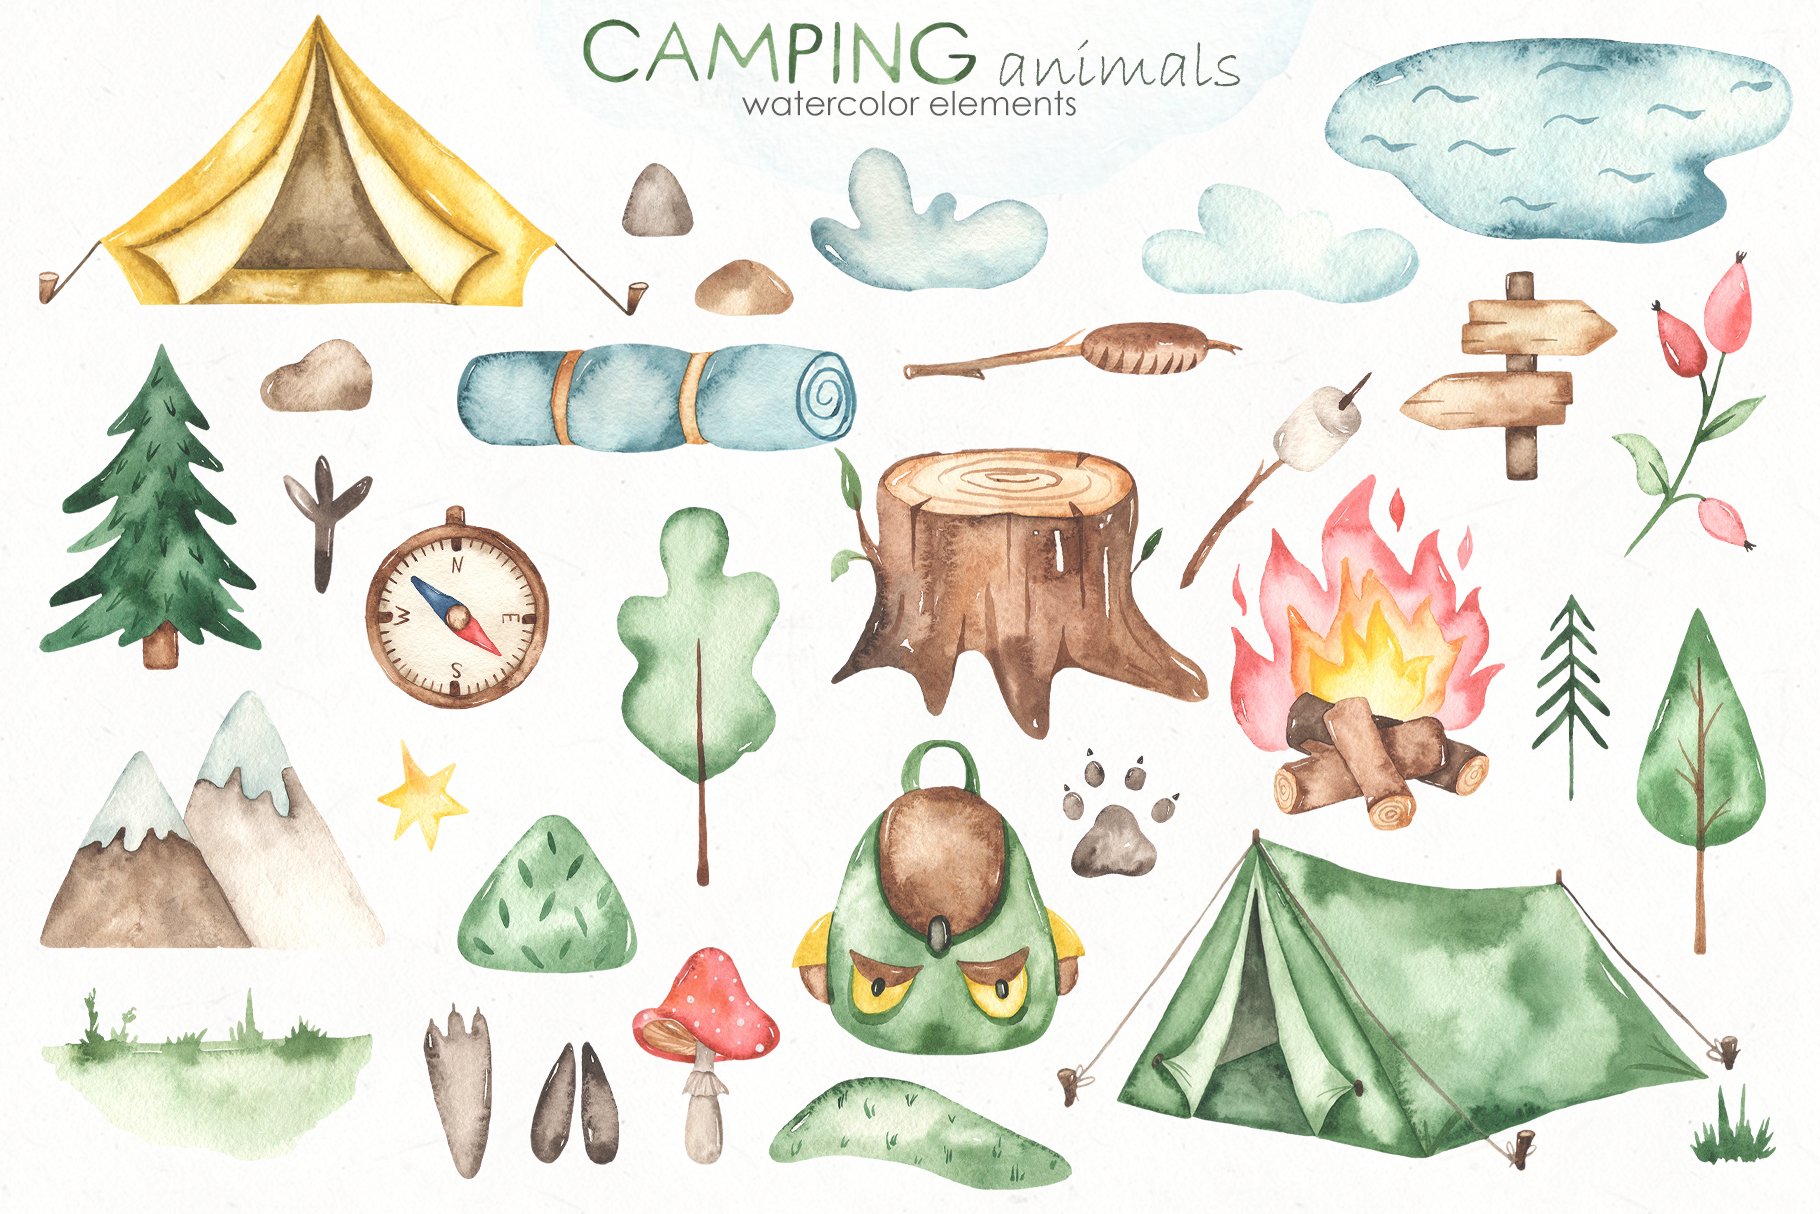 Pastel camping elements in a watercolor style.